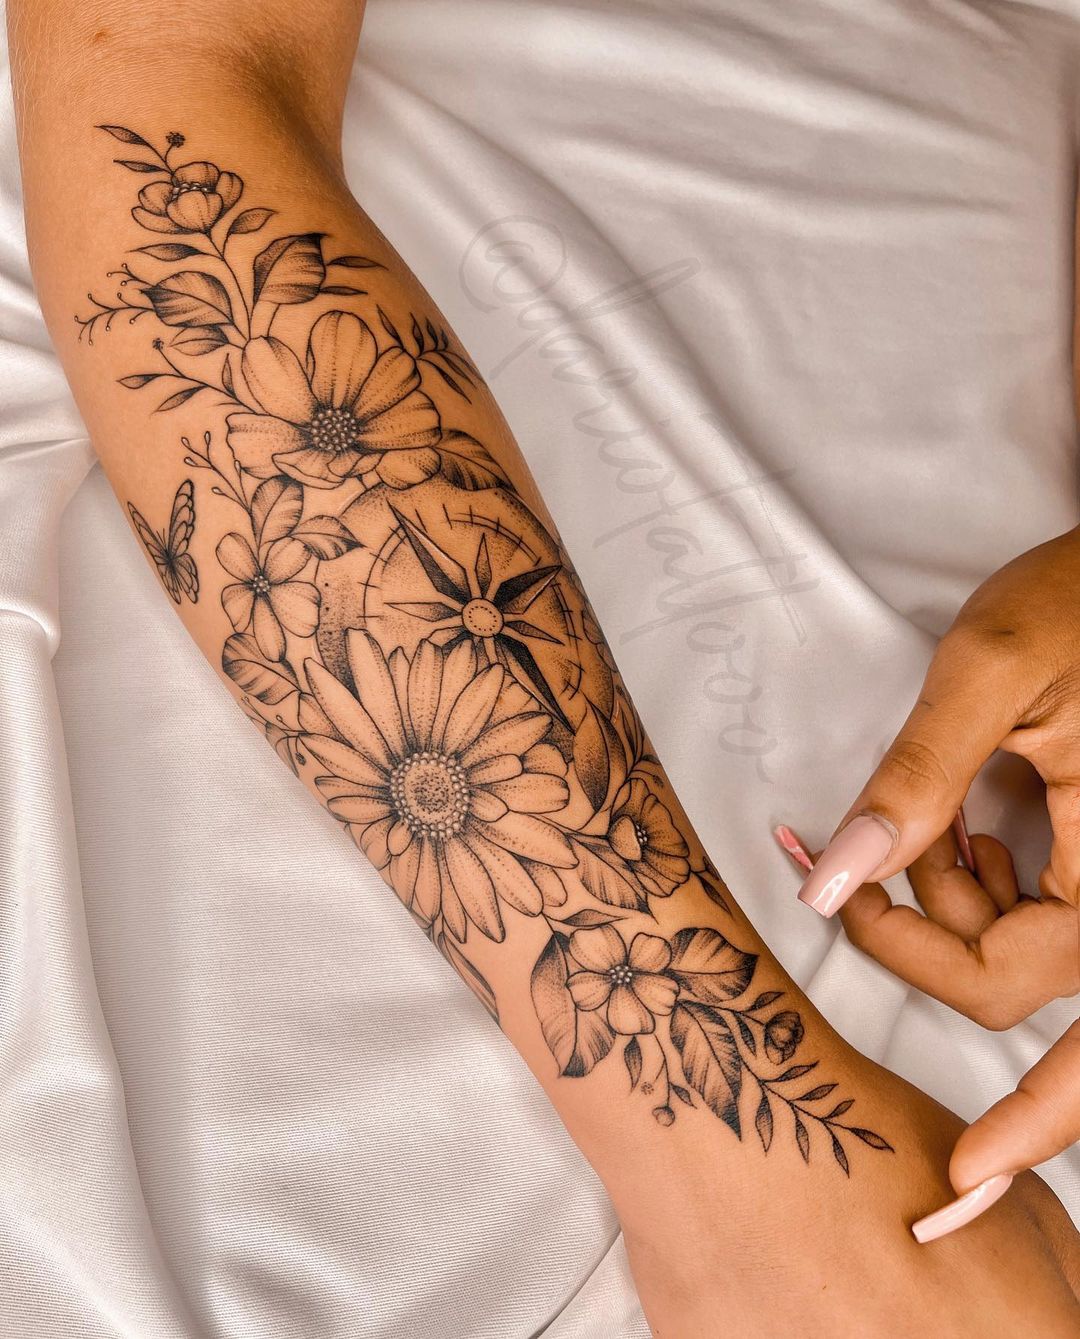 150 Hand Tattoos For Women That Will Transform Your Look